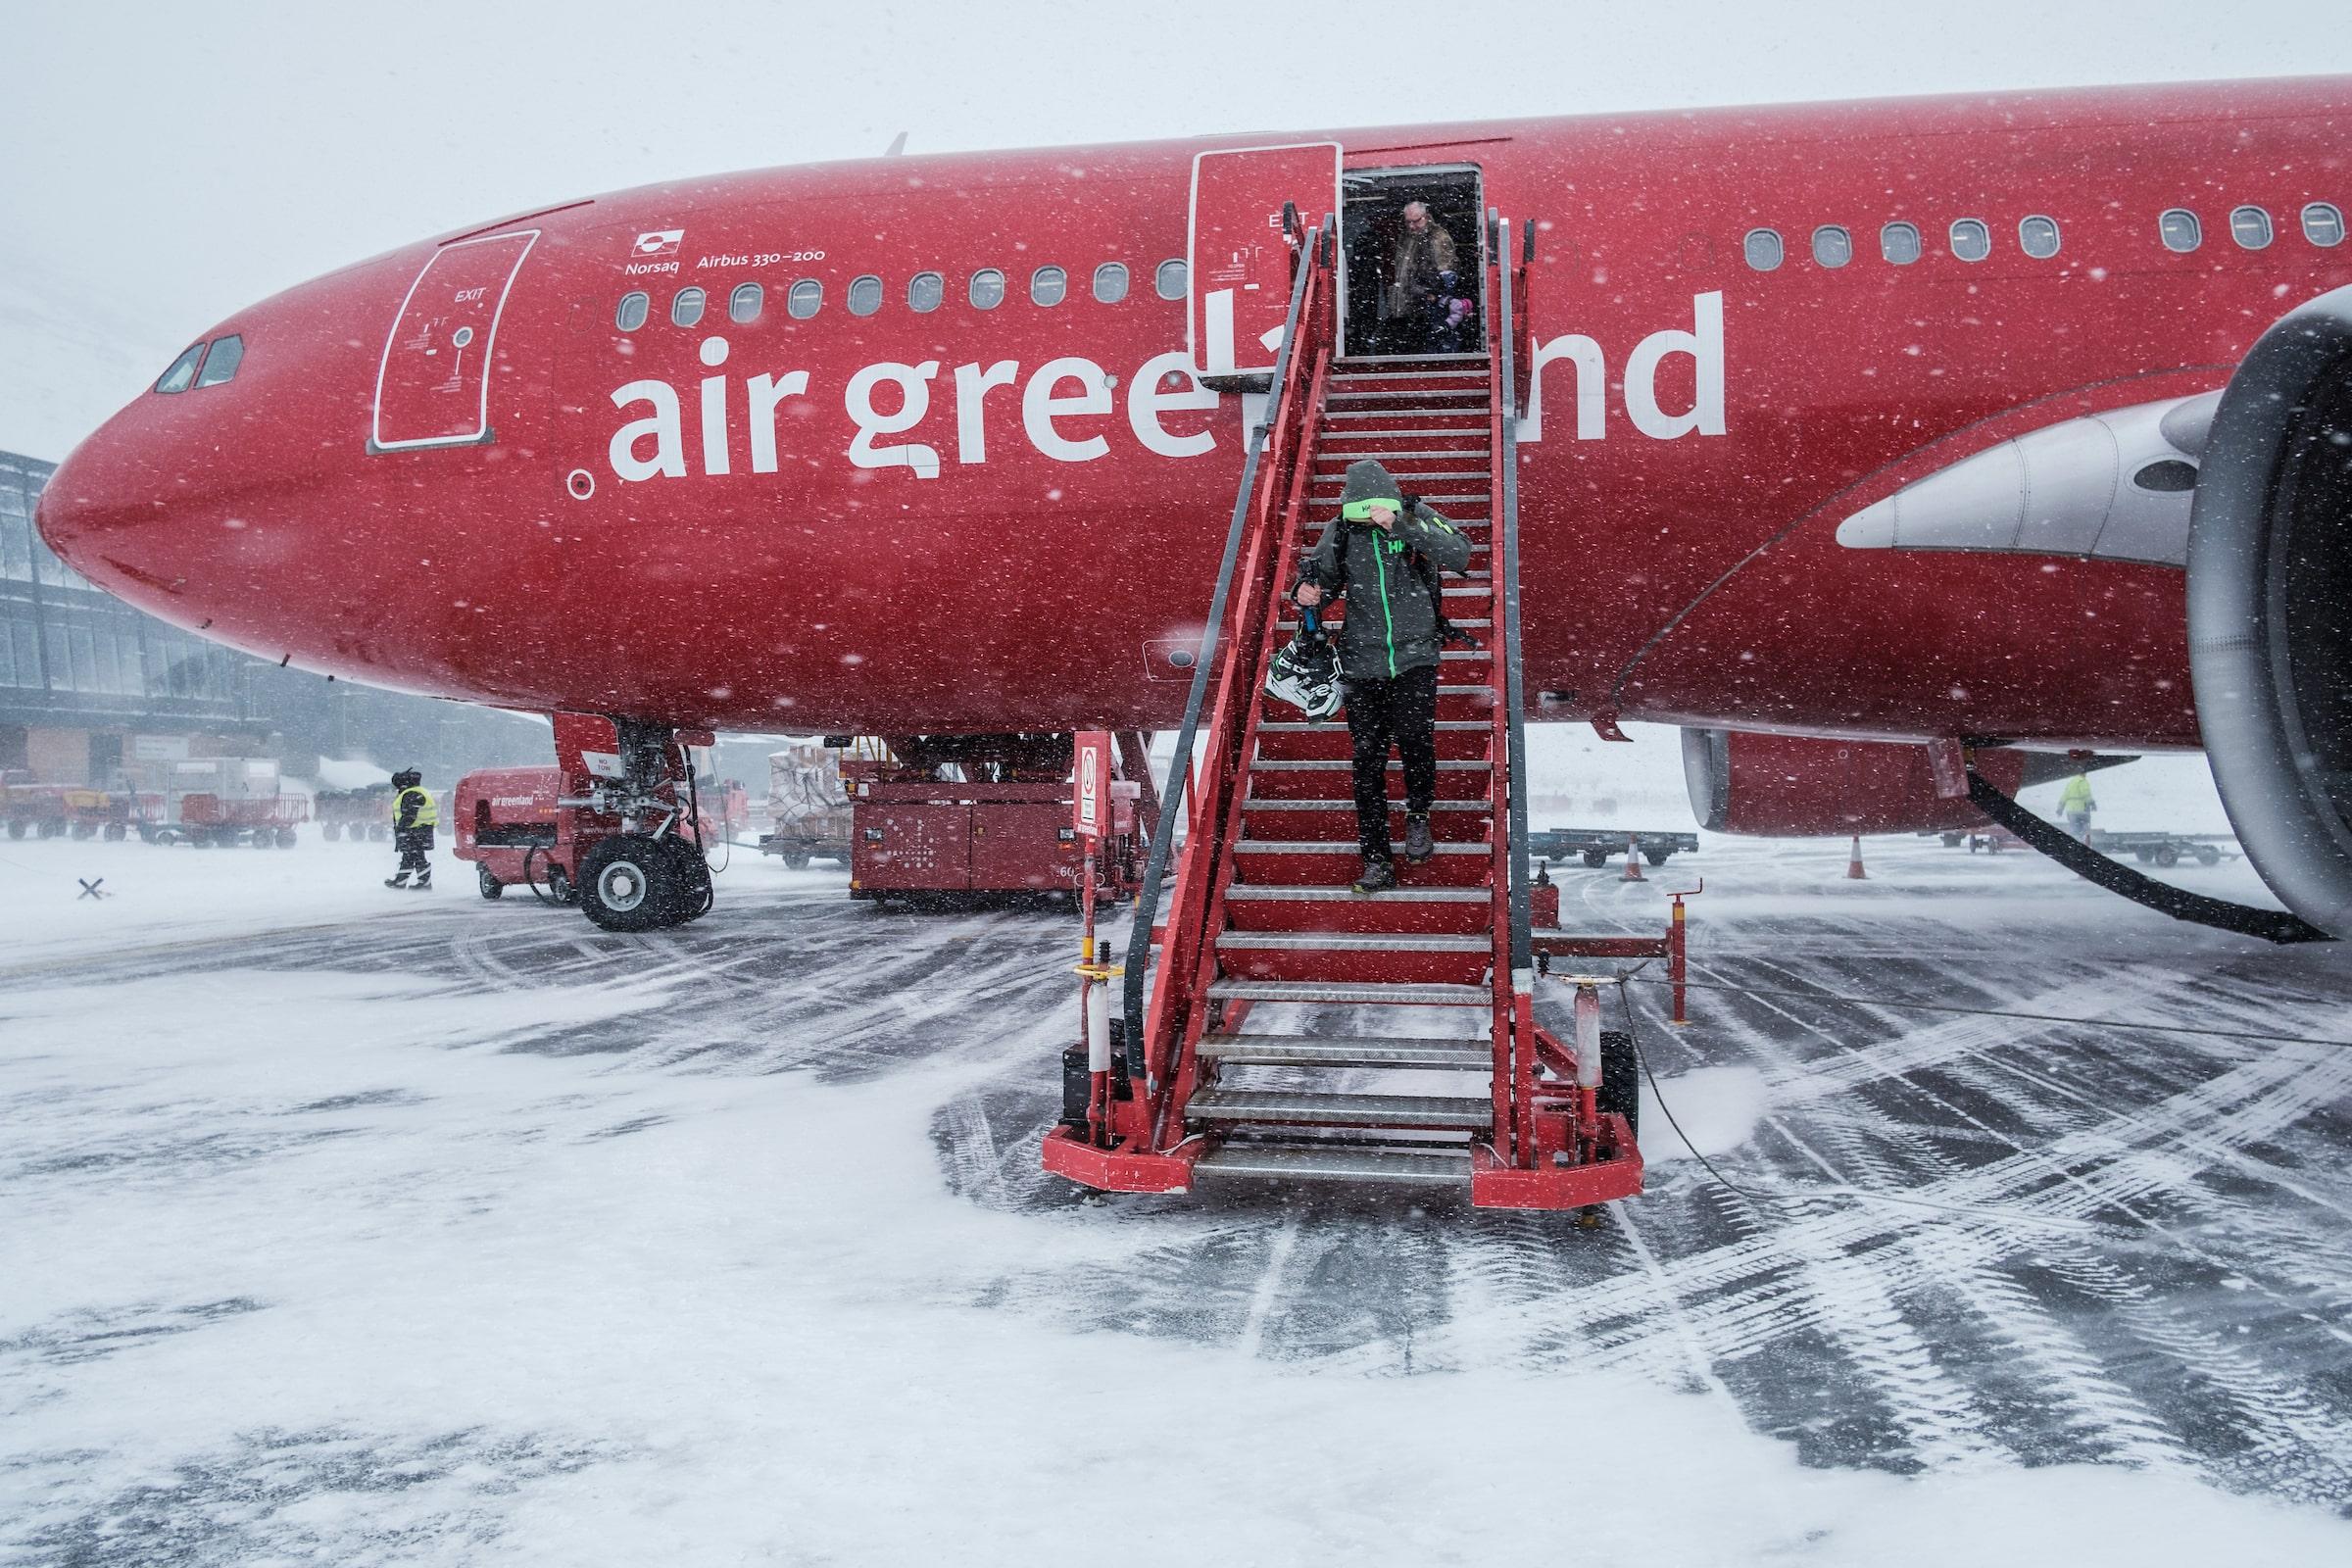 Arrival To Kangerlussuaq with Norsaq, Air Greenland's Airbus 330 on a Snowy Day. Photo by Petter Cohen